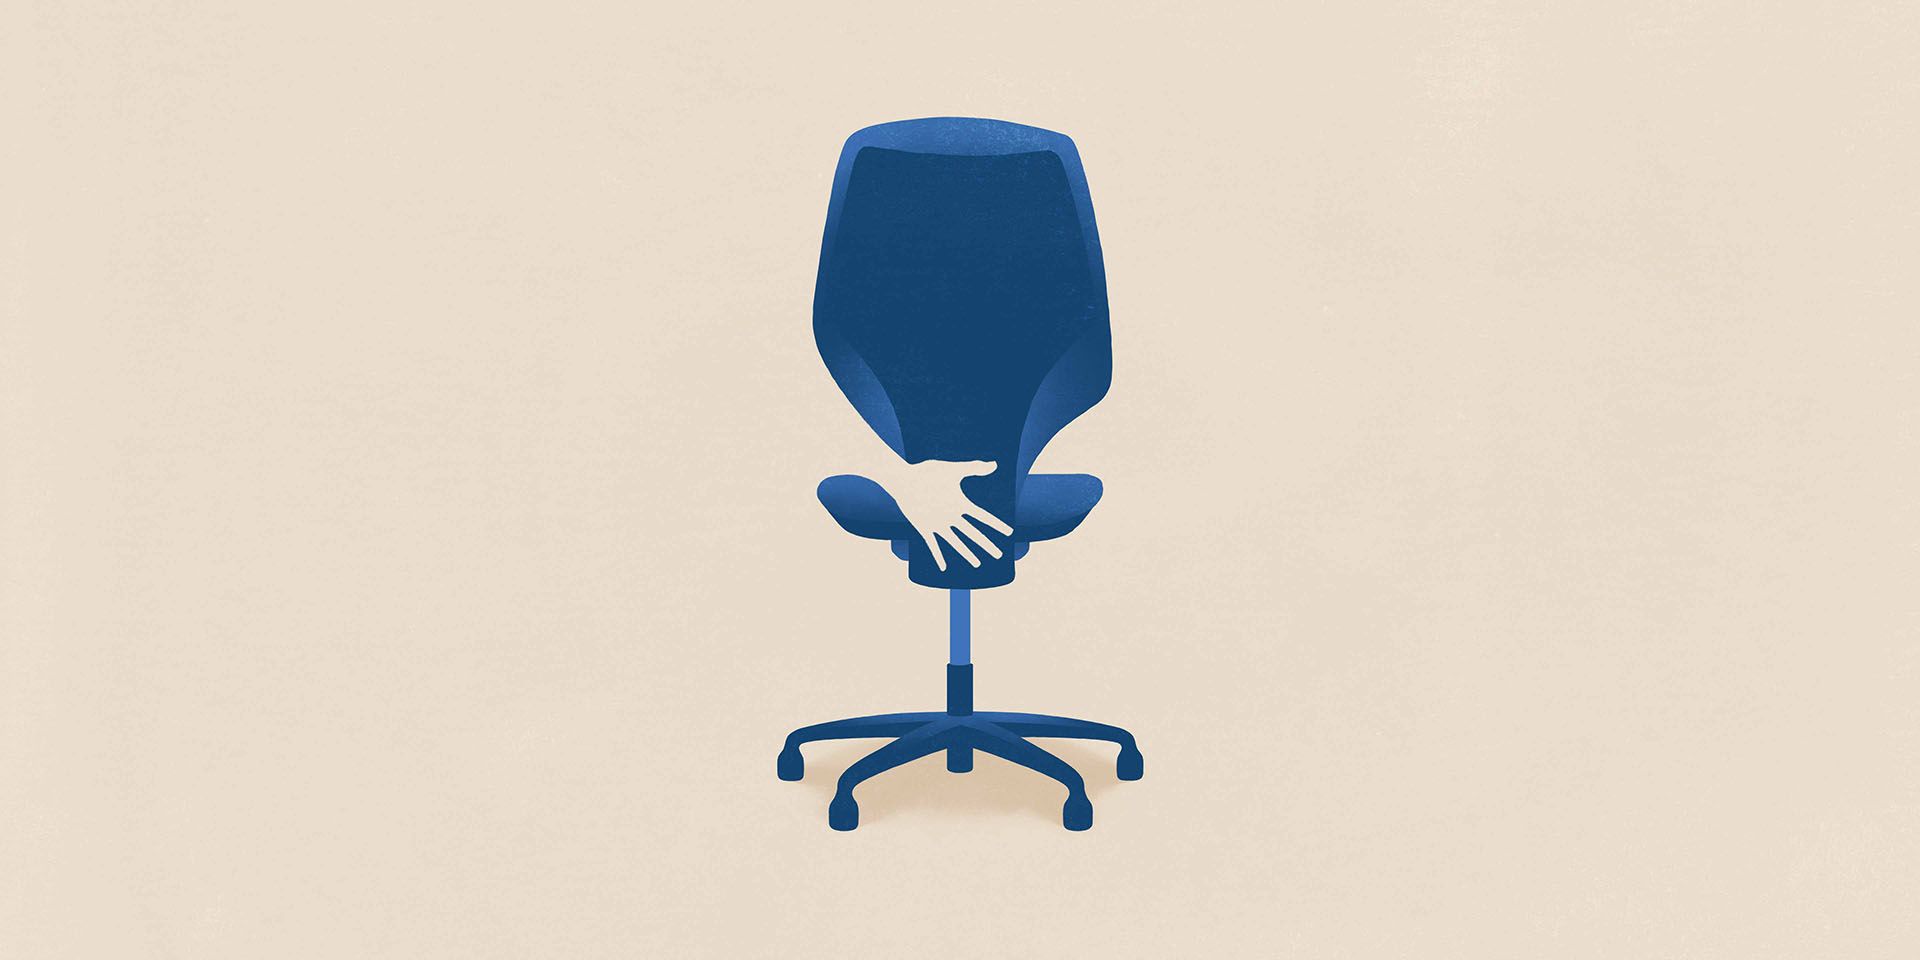 Sexual harassment in the workplace is symbolised by a hand touching an office chair.